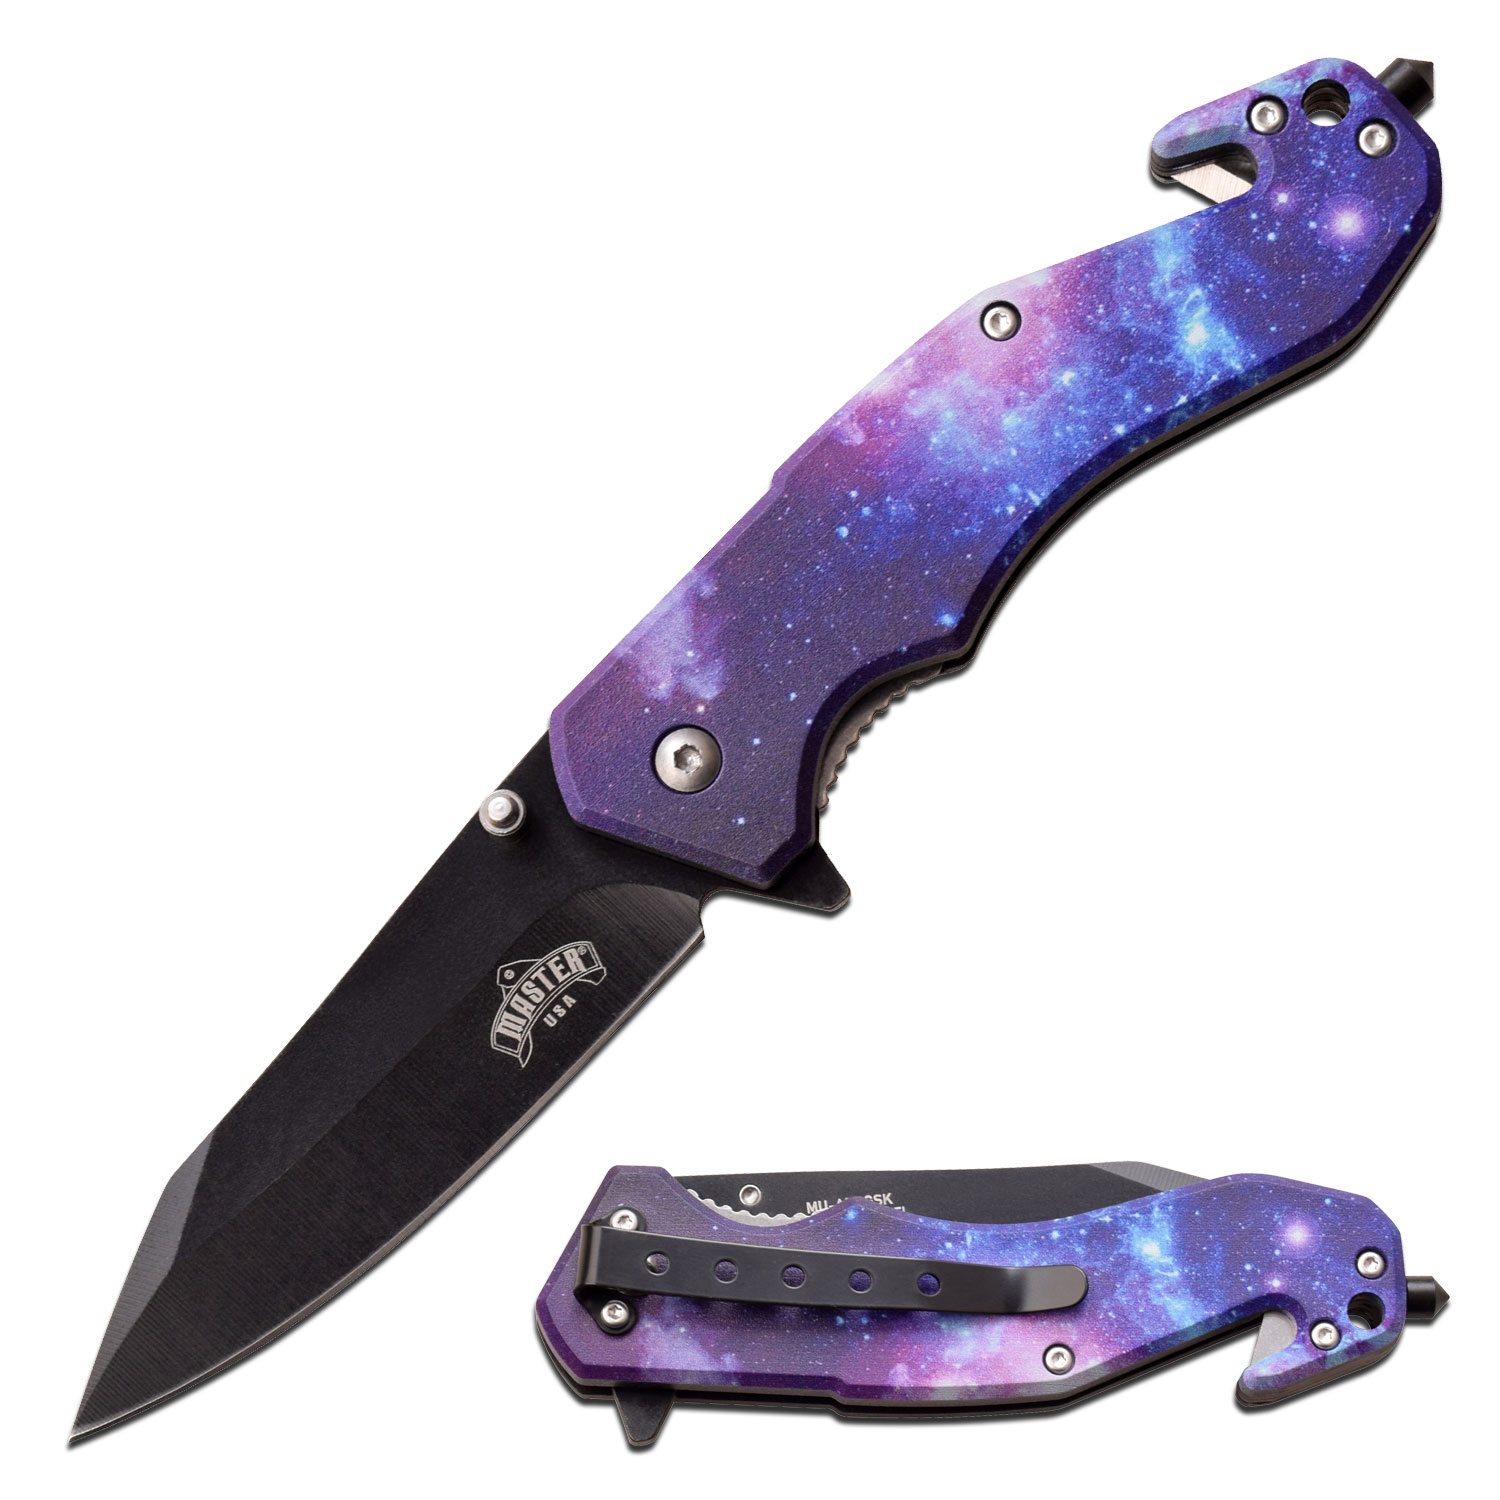 Spring-Assist Folding Knife 3.25In Black Blade Purple Space Galaxy Rescue EDC